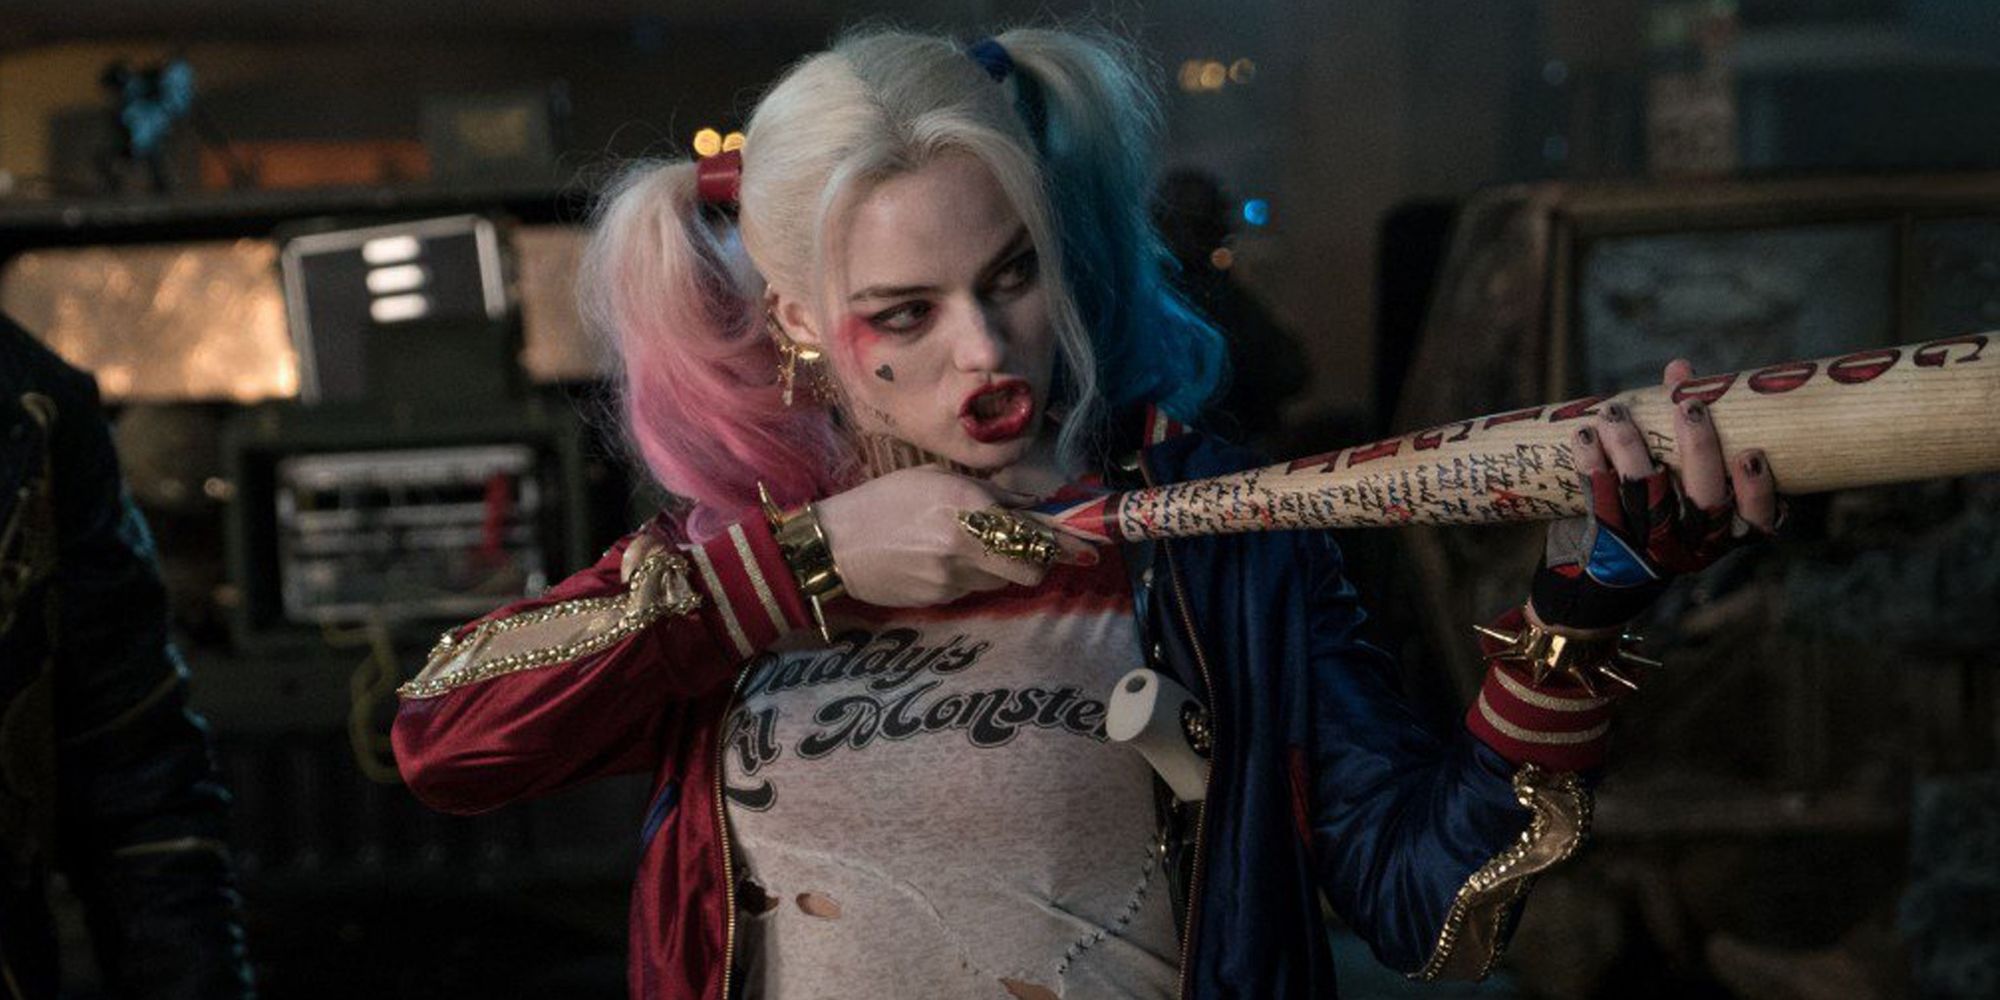 Harley Quinn points her bat in Suicide Squad